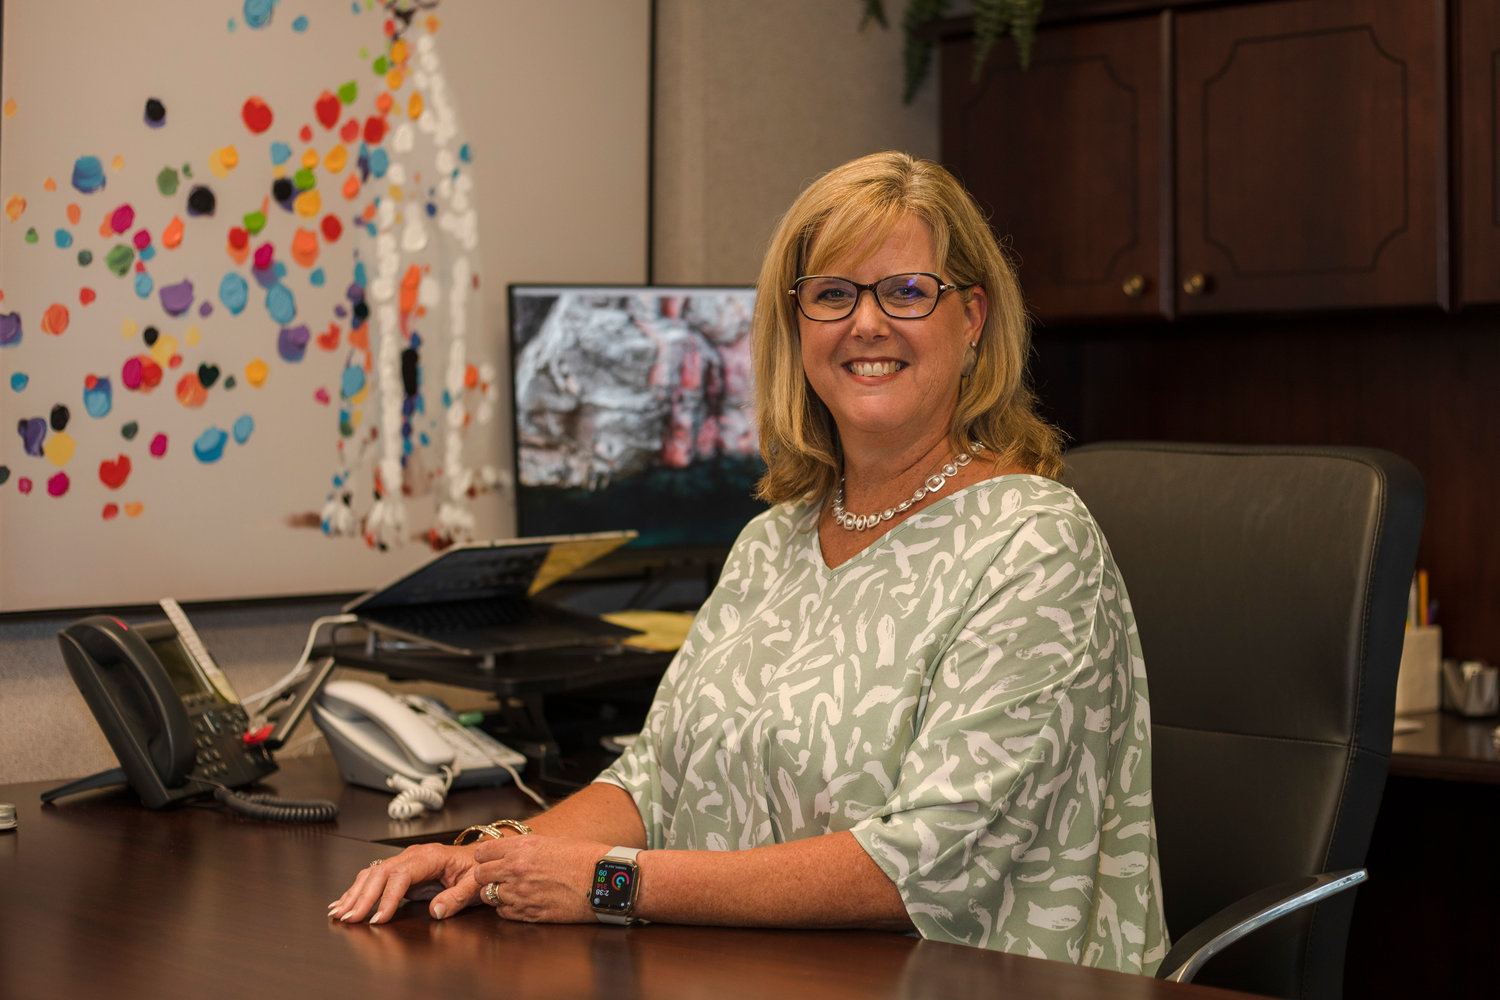 Next month, Jacque Helms will begin her first full year as principal of Loxley Elementary School, and she’s excited to welcome back the students, staff and community.